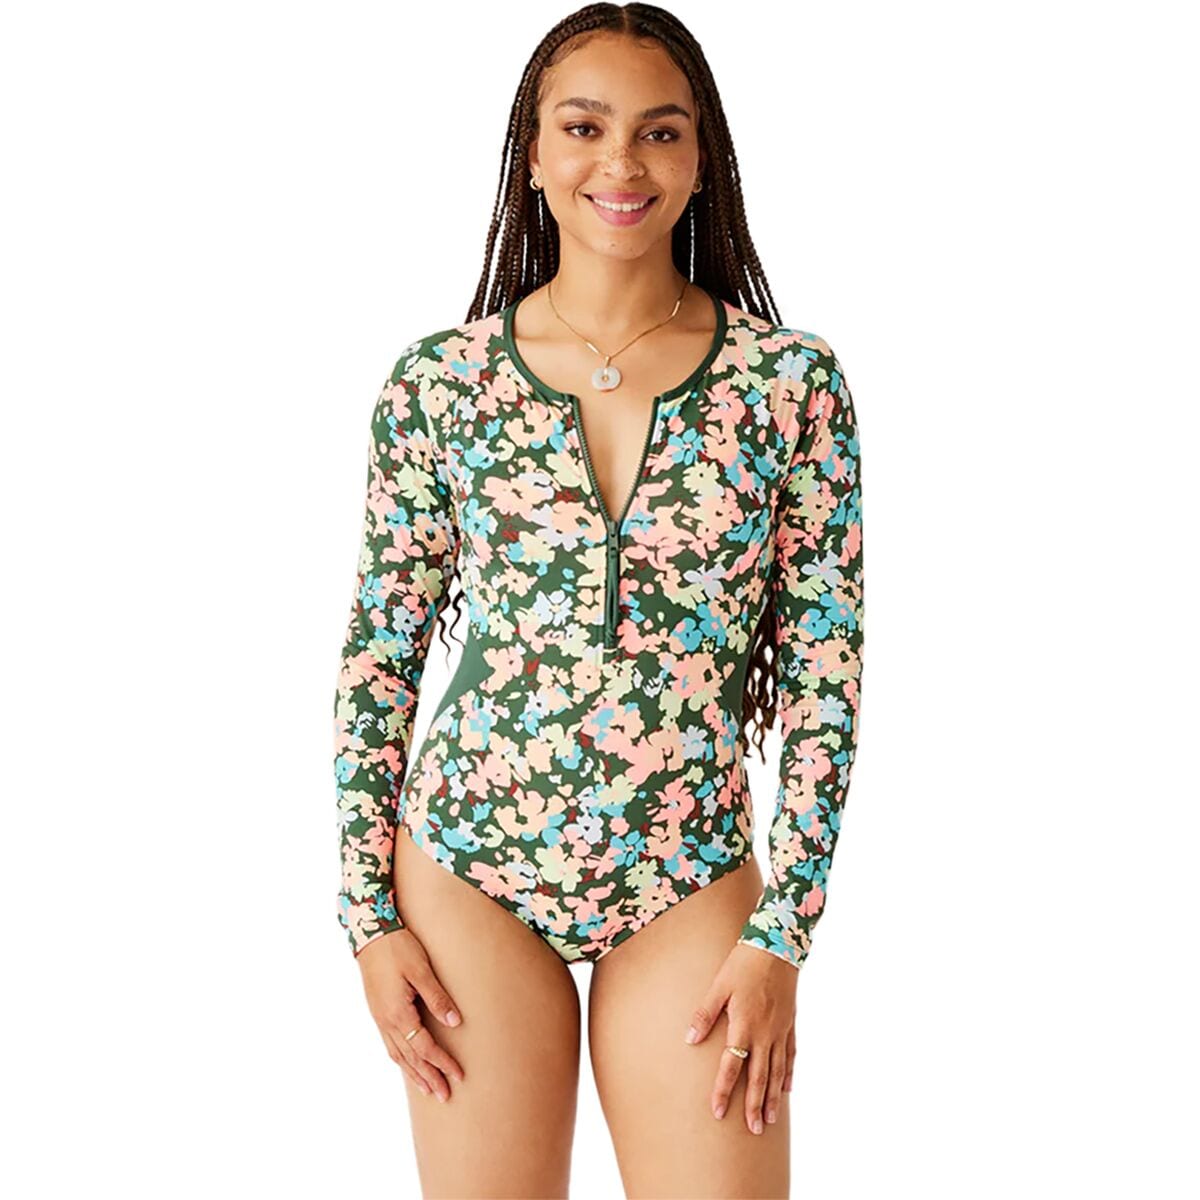 All Day Long-Sleeve One-Piece Swimsuit - Women